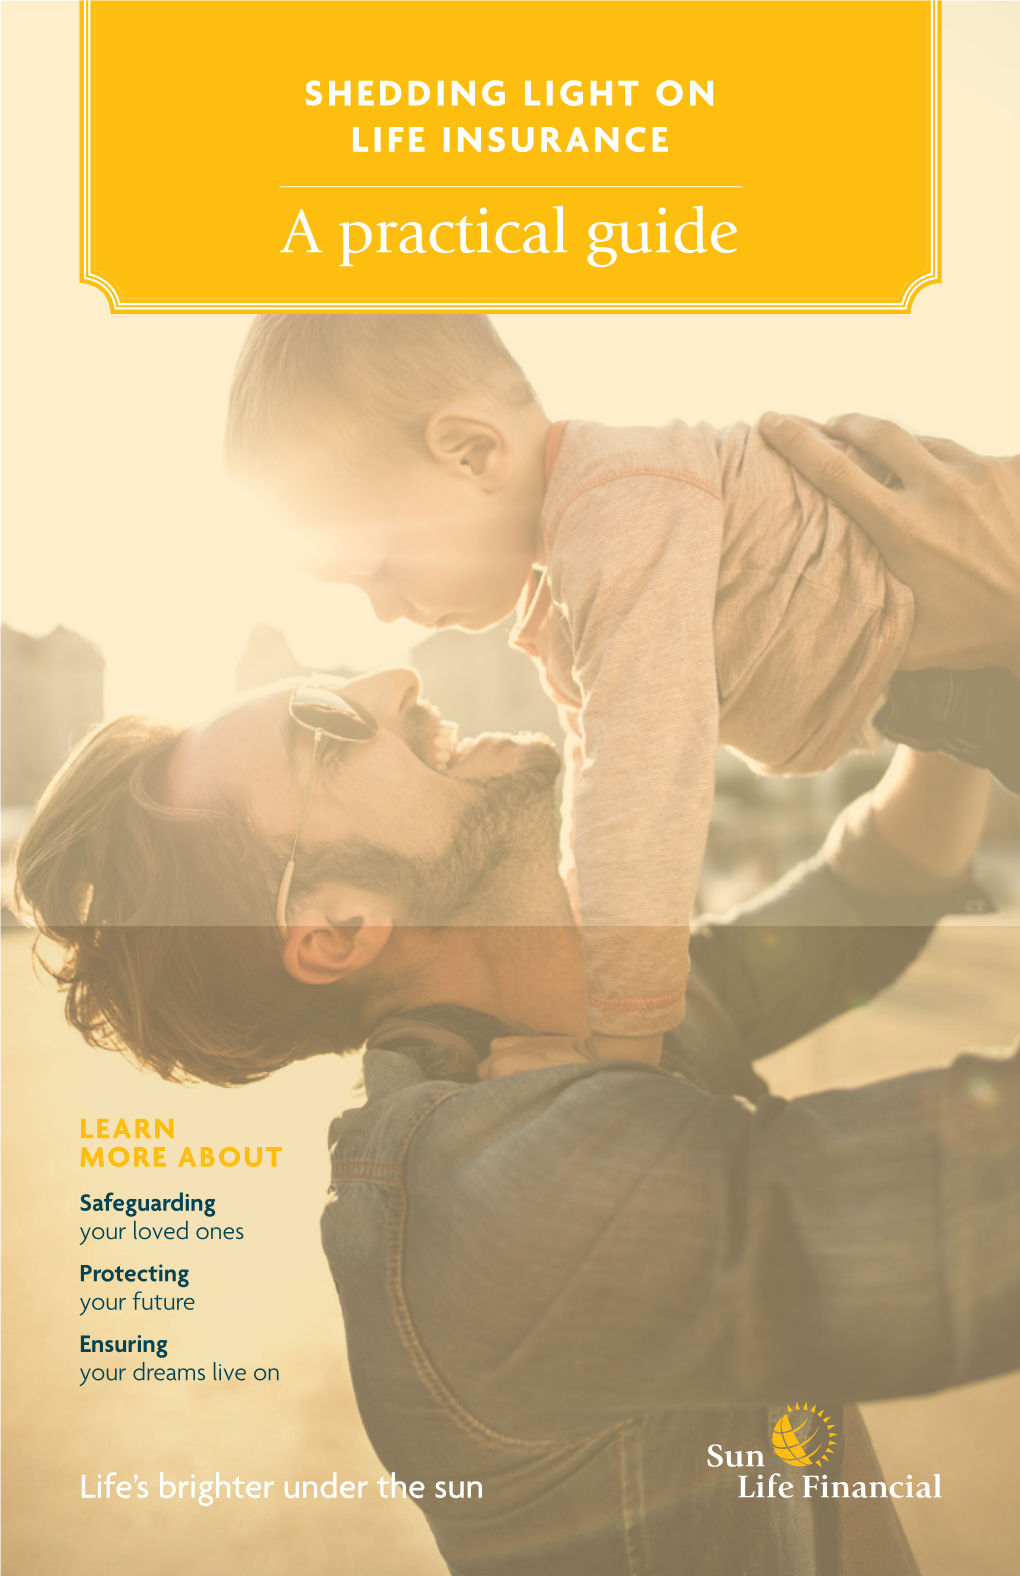 SHEDDING LIGHT on LIFE INSURANCE: a Practical Guide